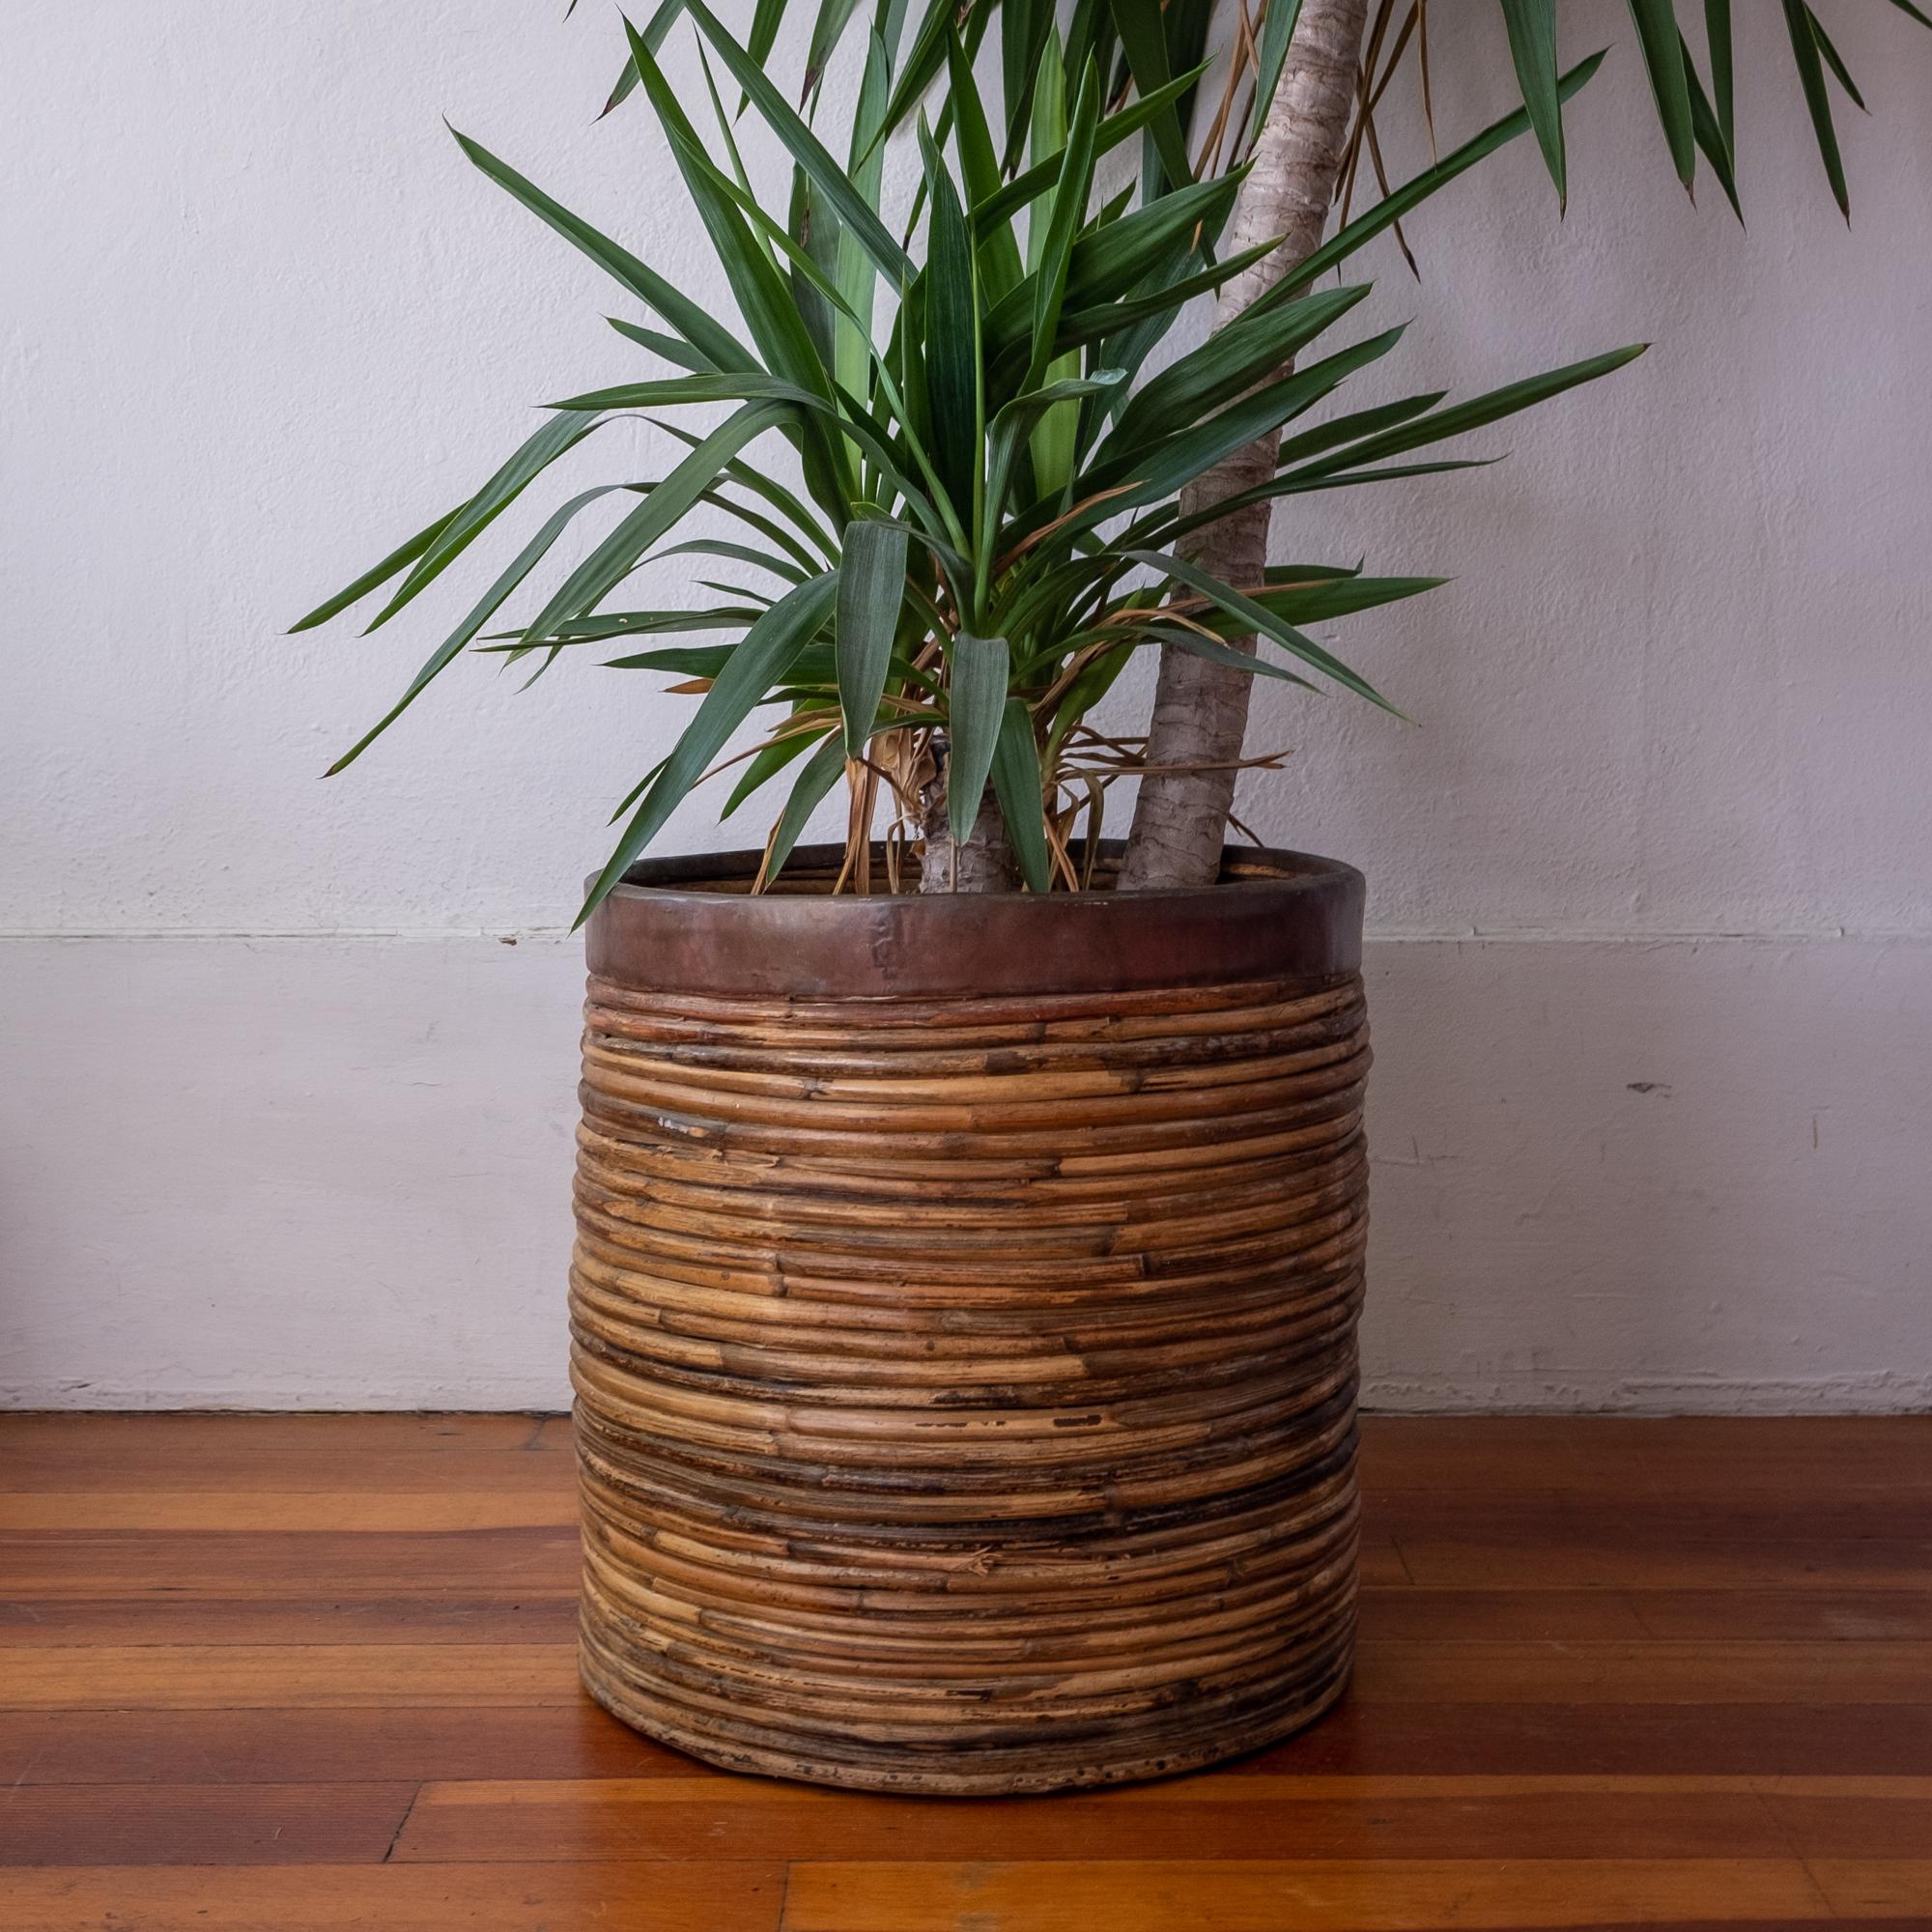 Midcentury brass and rattan planter or waste basket. Handcrafted reed with brass rim. Great patina. 1970s.